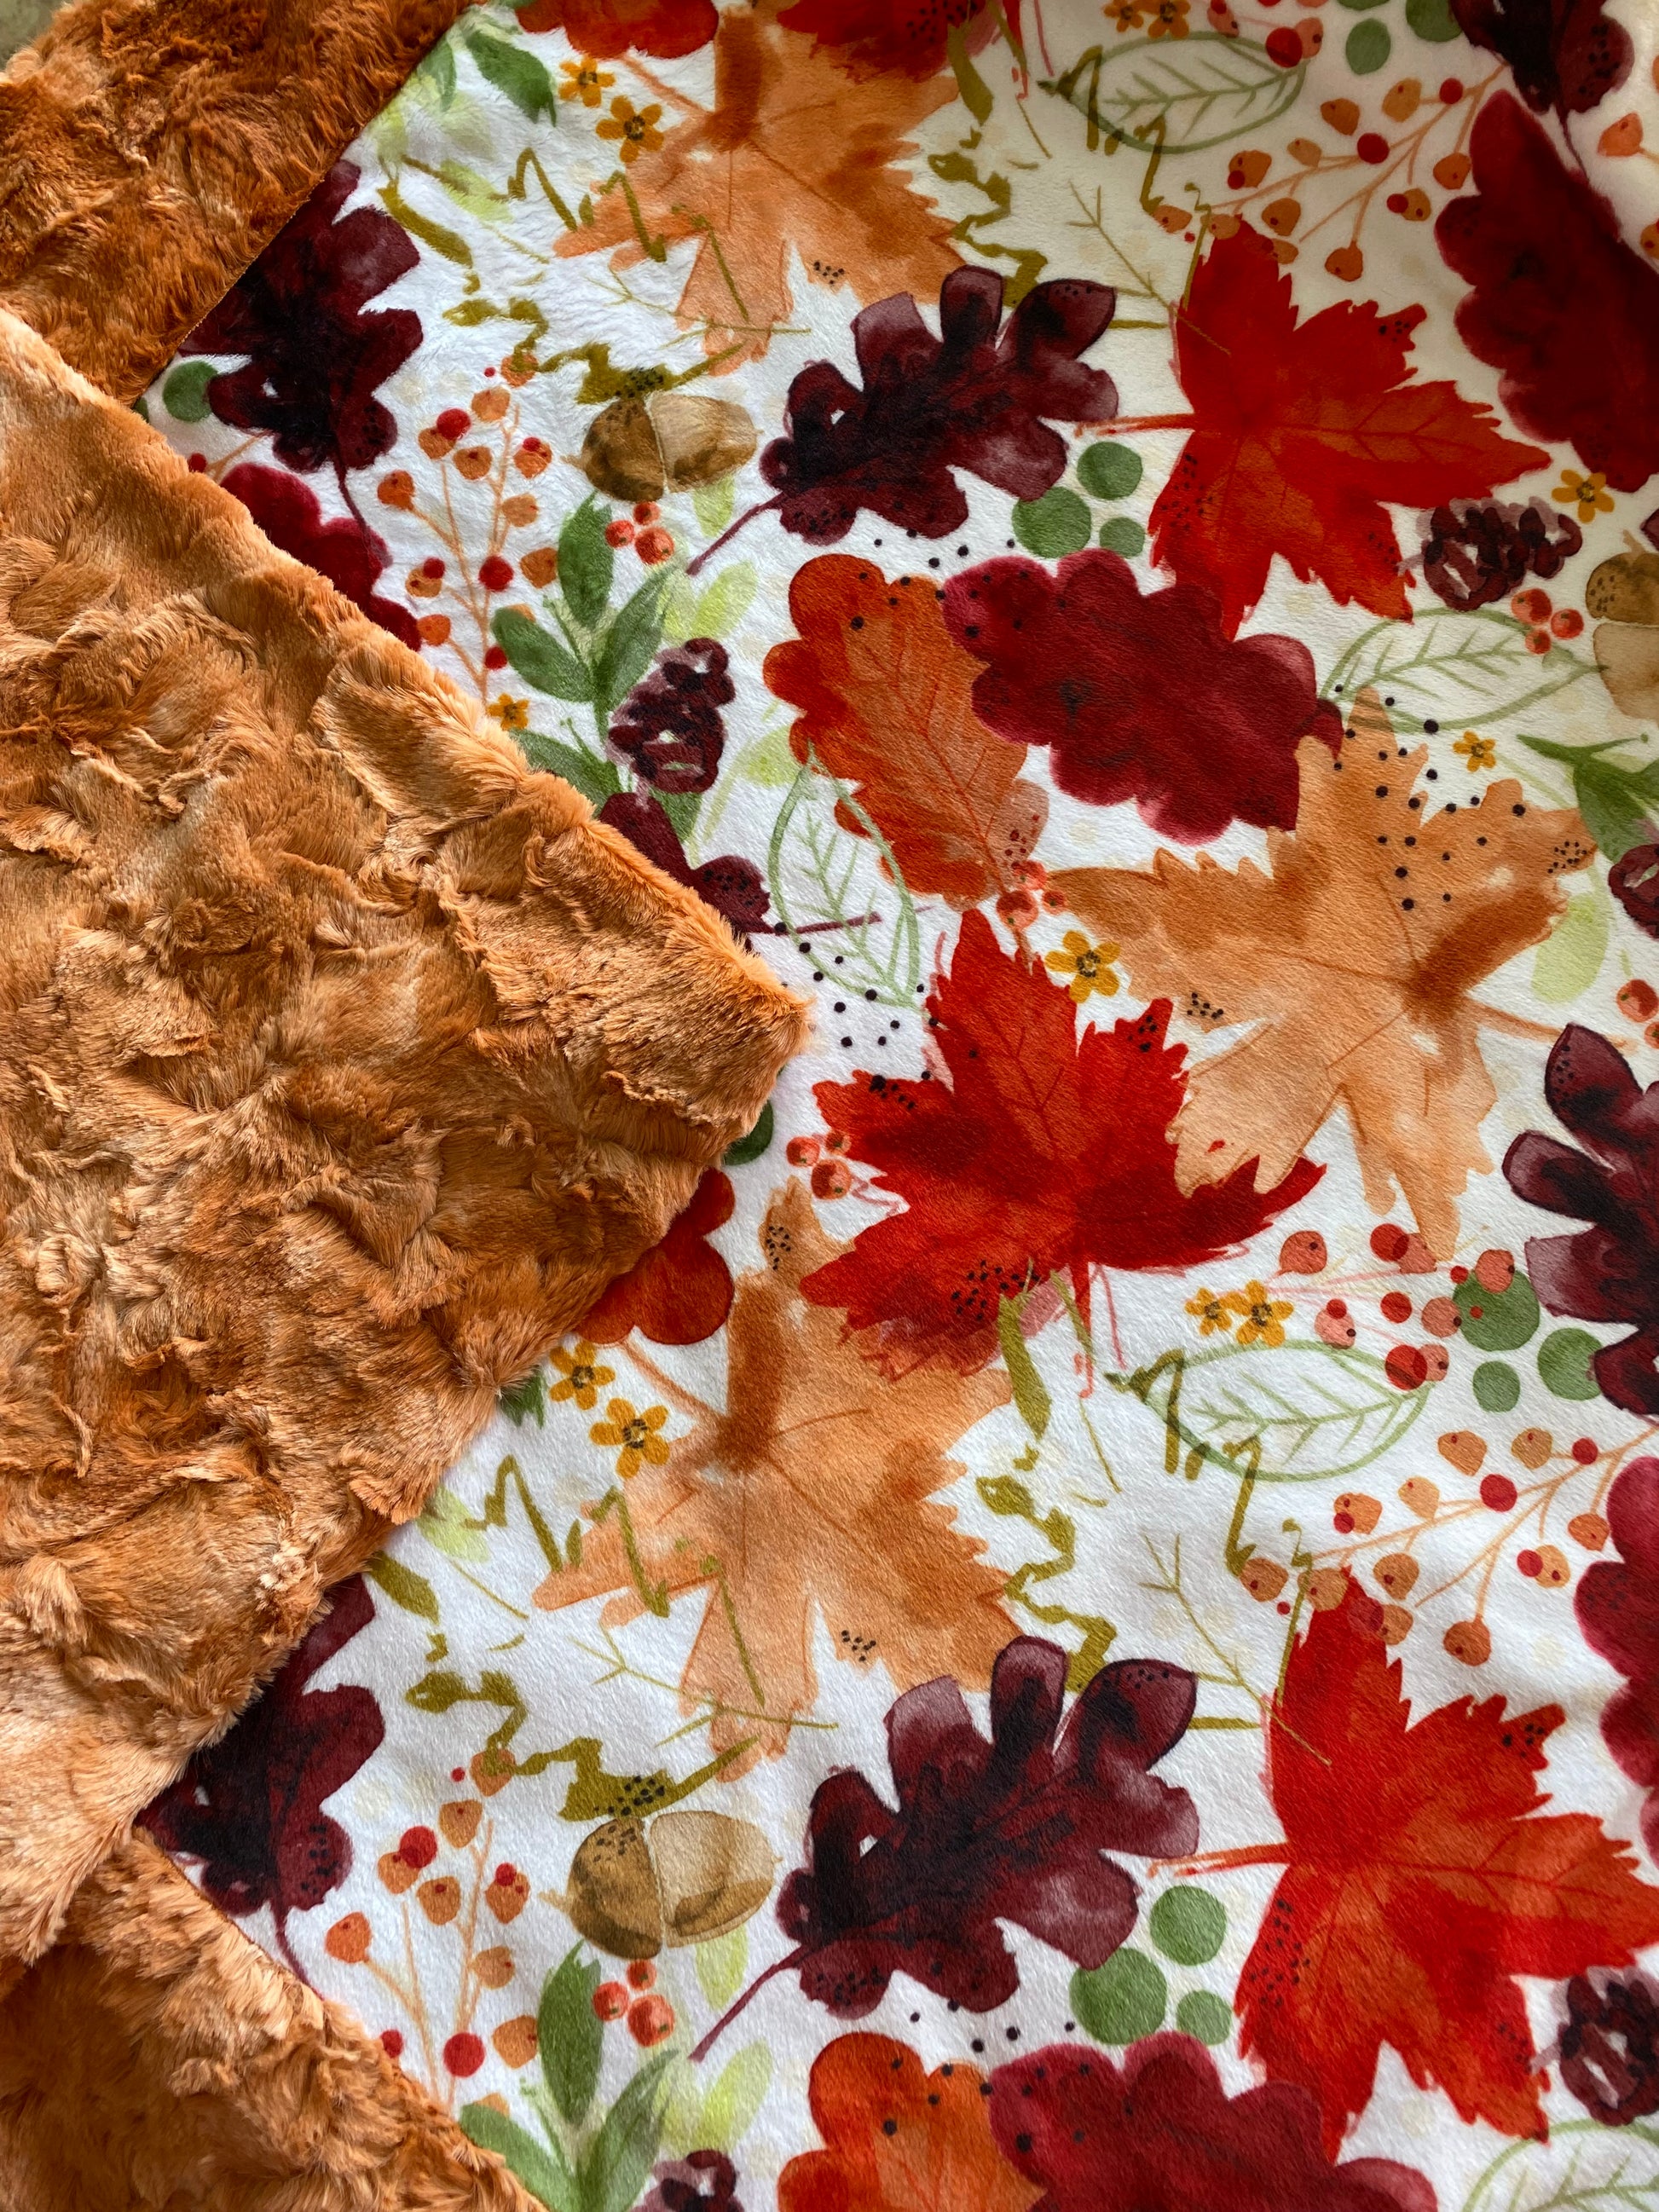 Autumn Leaves on Ginger Galaxy Large Minky Blanket - Detailed Craftsmanship - 53x65